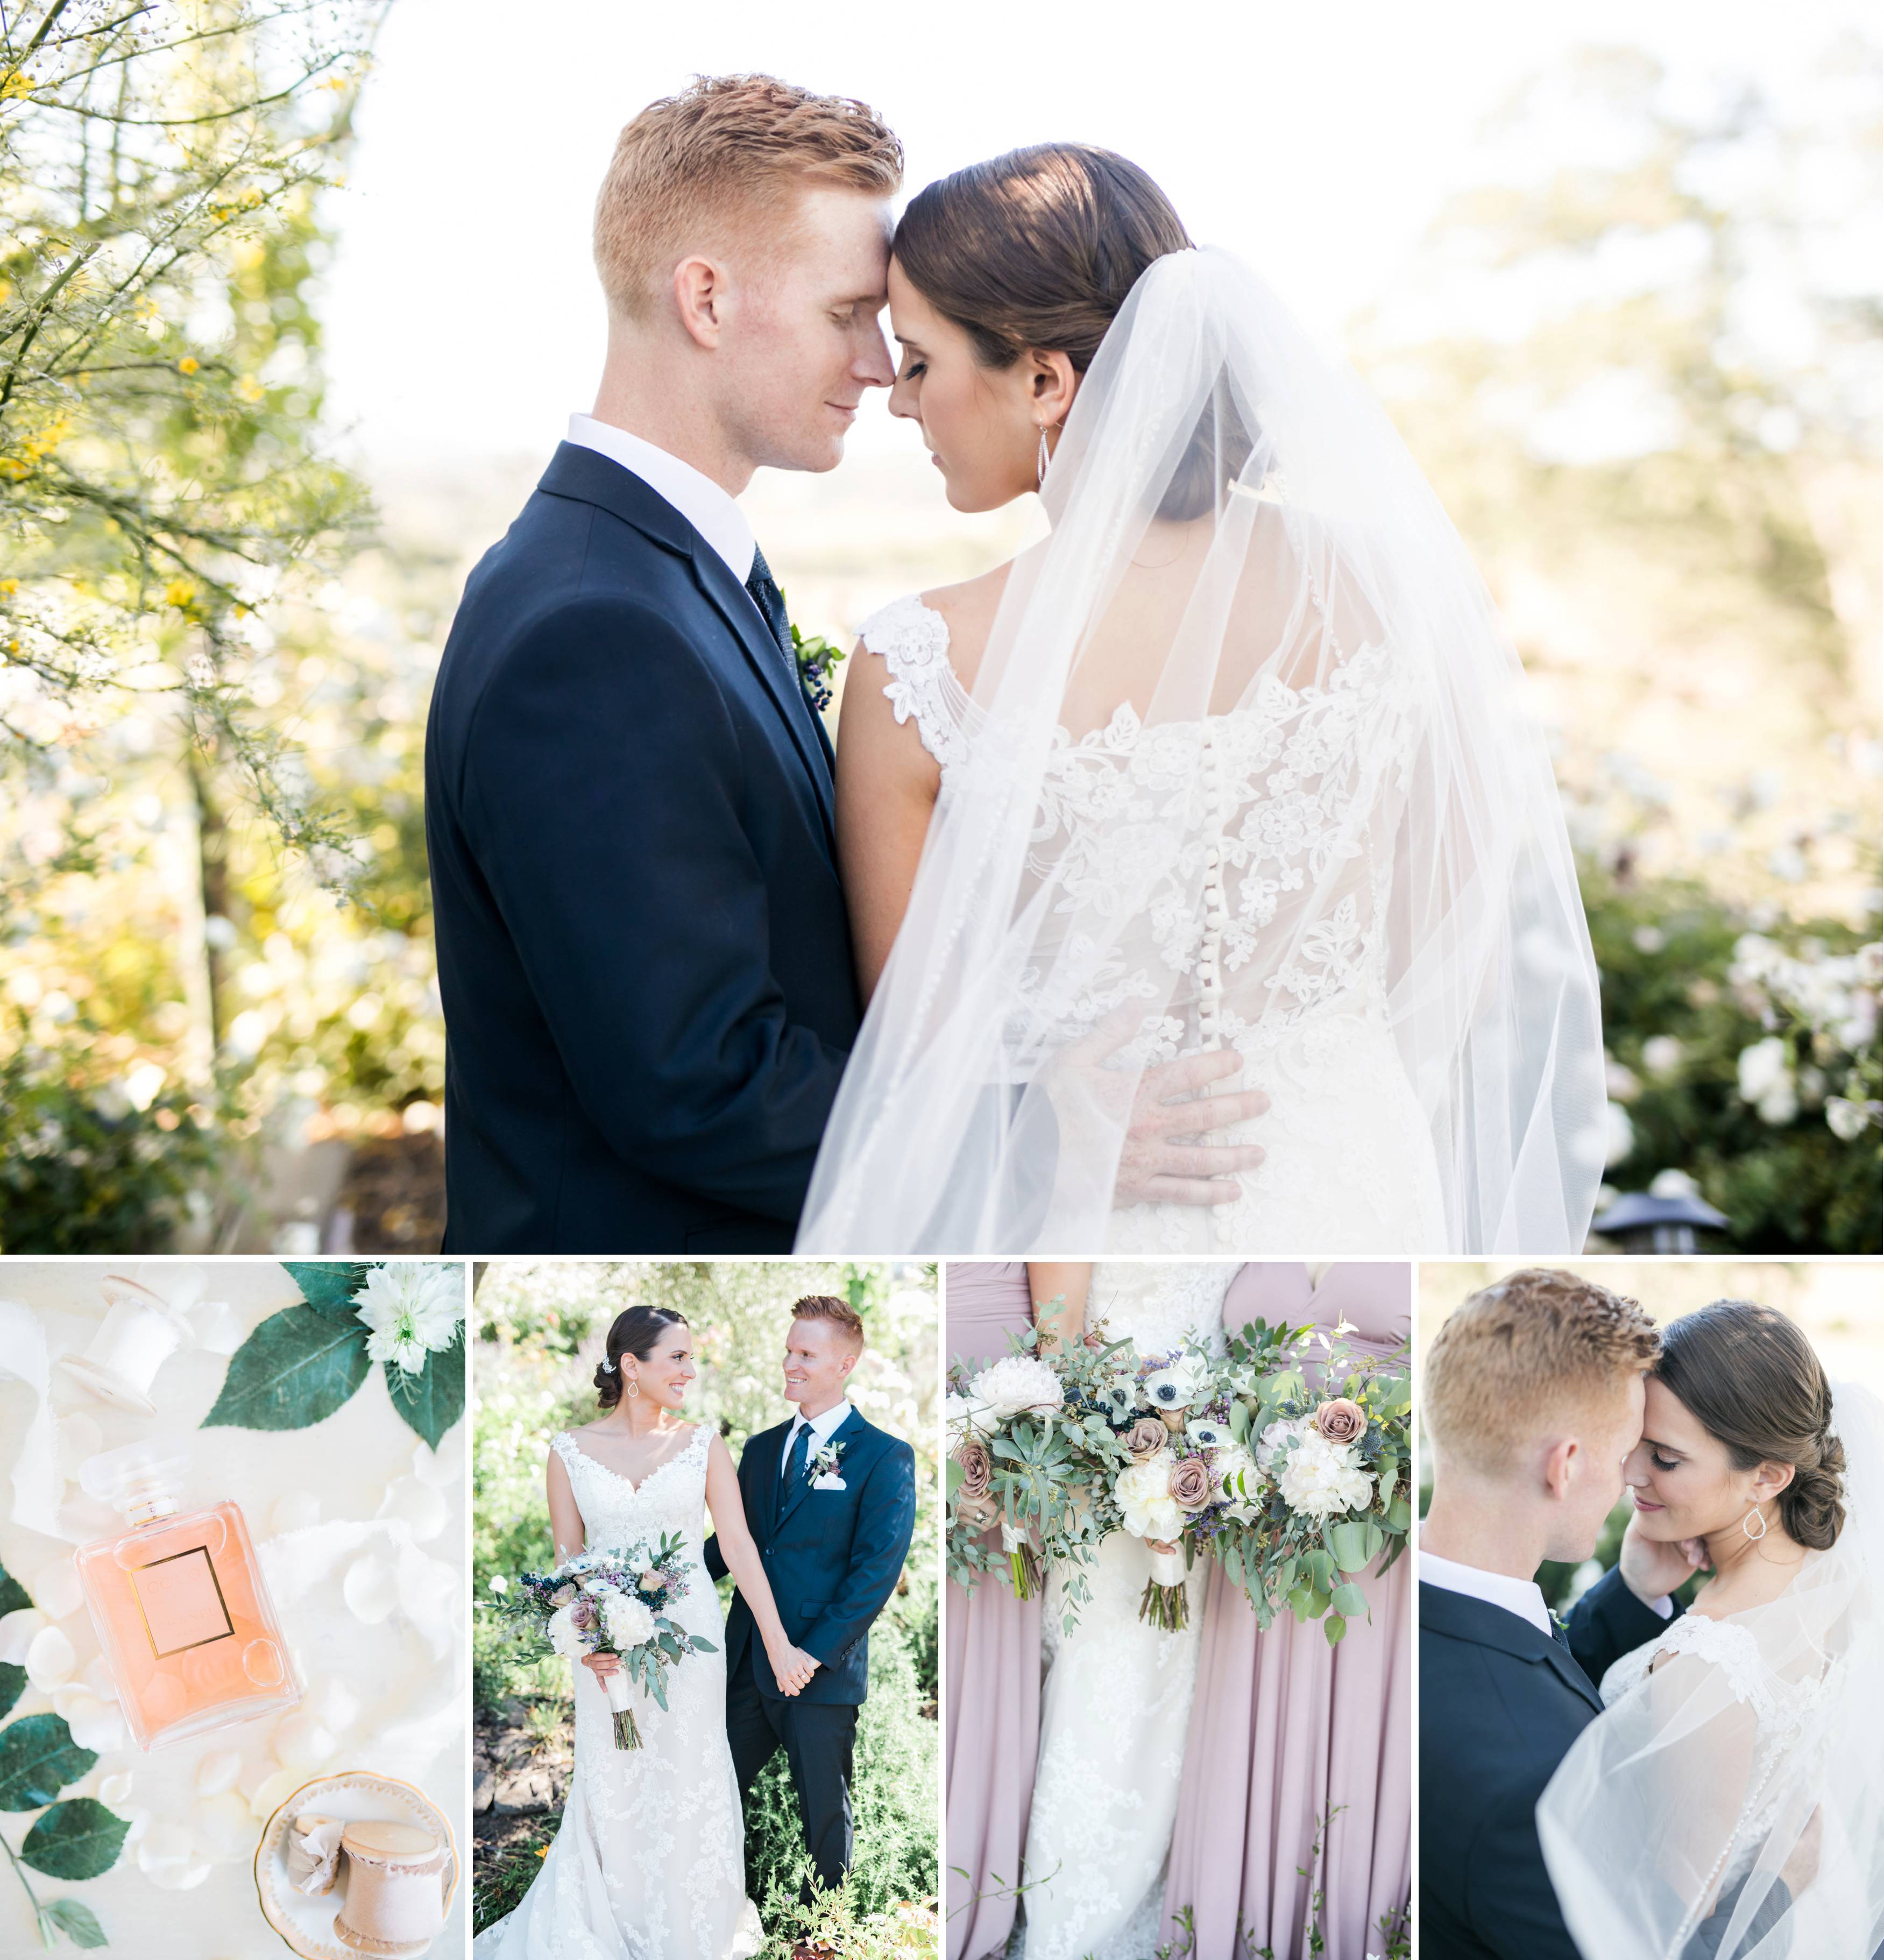 Beautiful Mauve and white garden wedding at forever and always farm temecula wedding venue